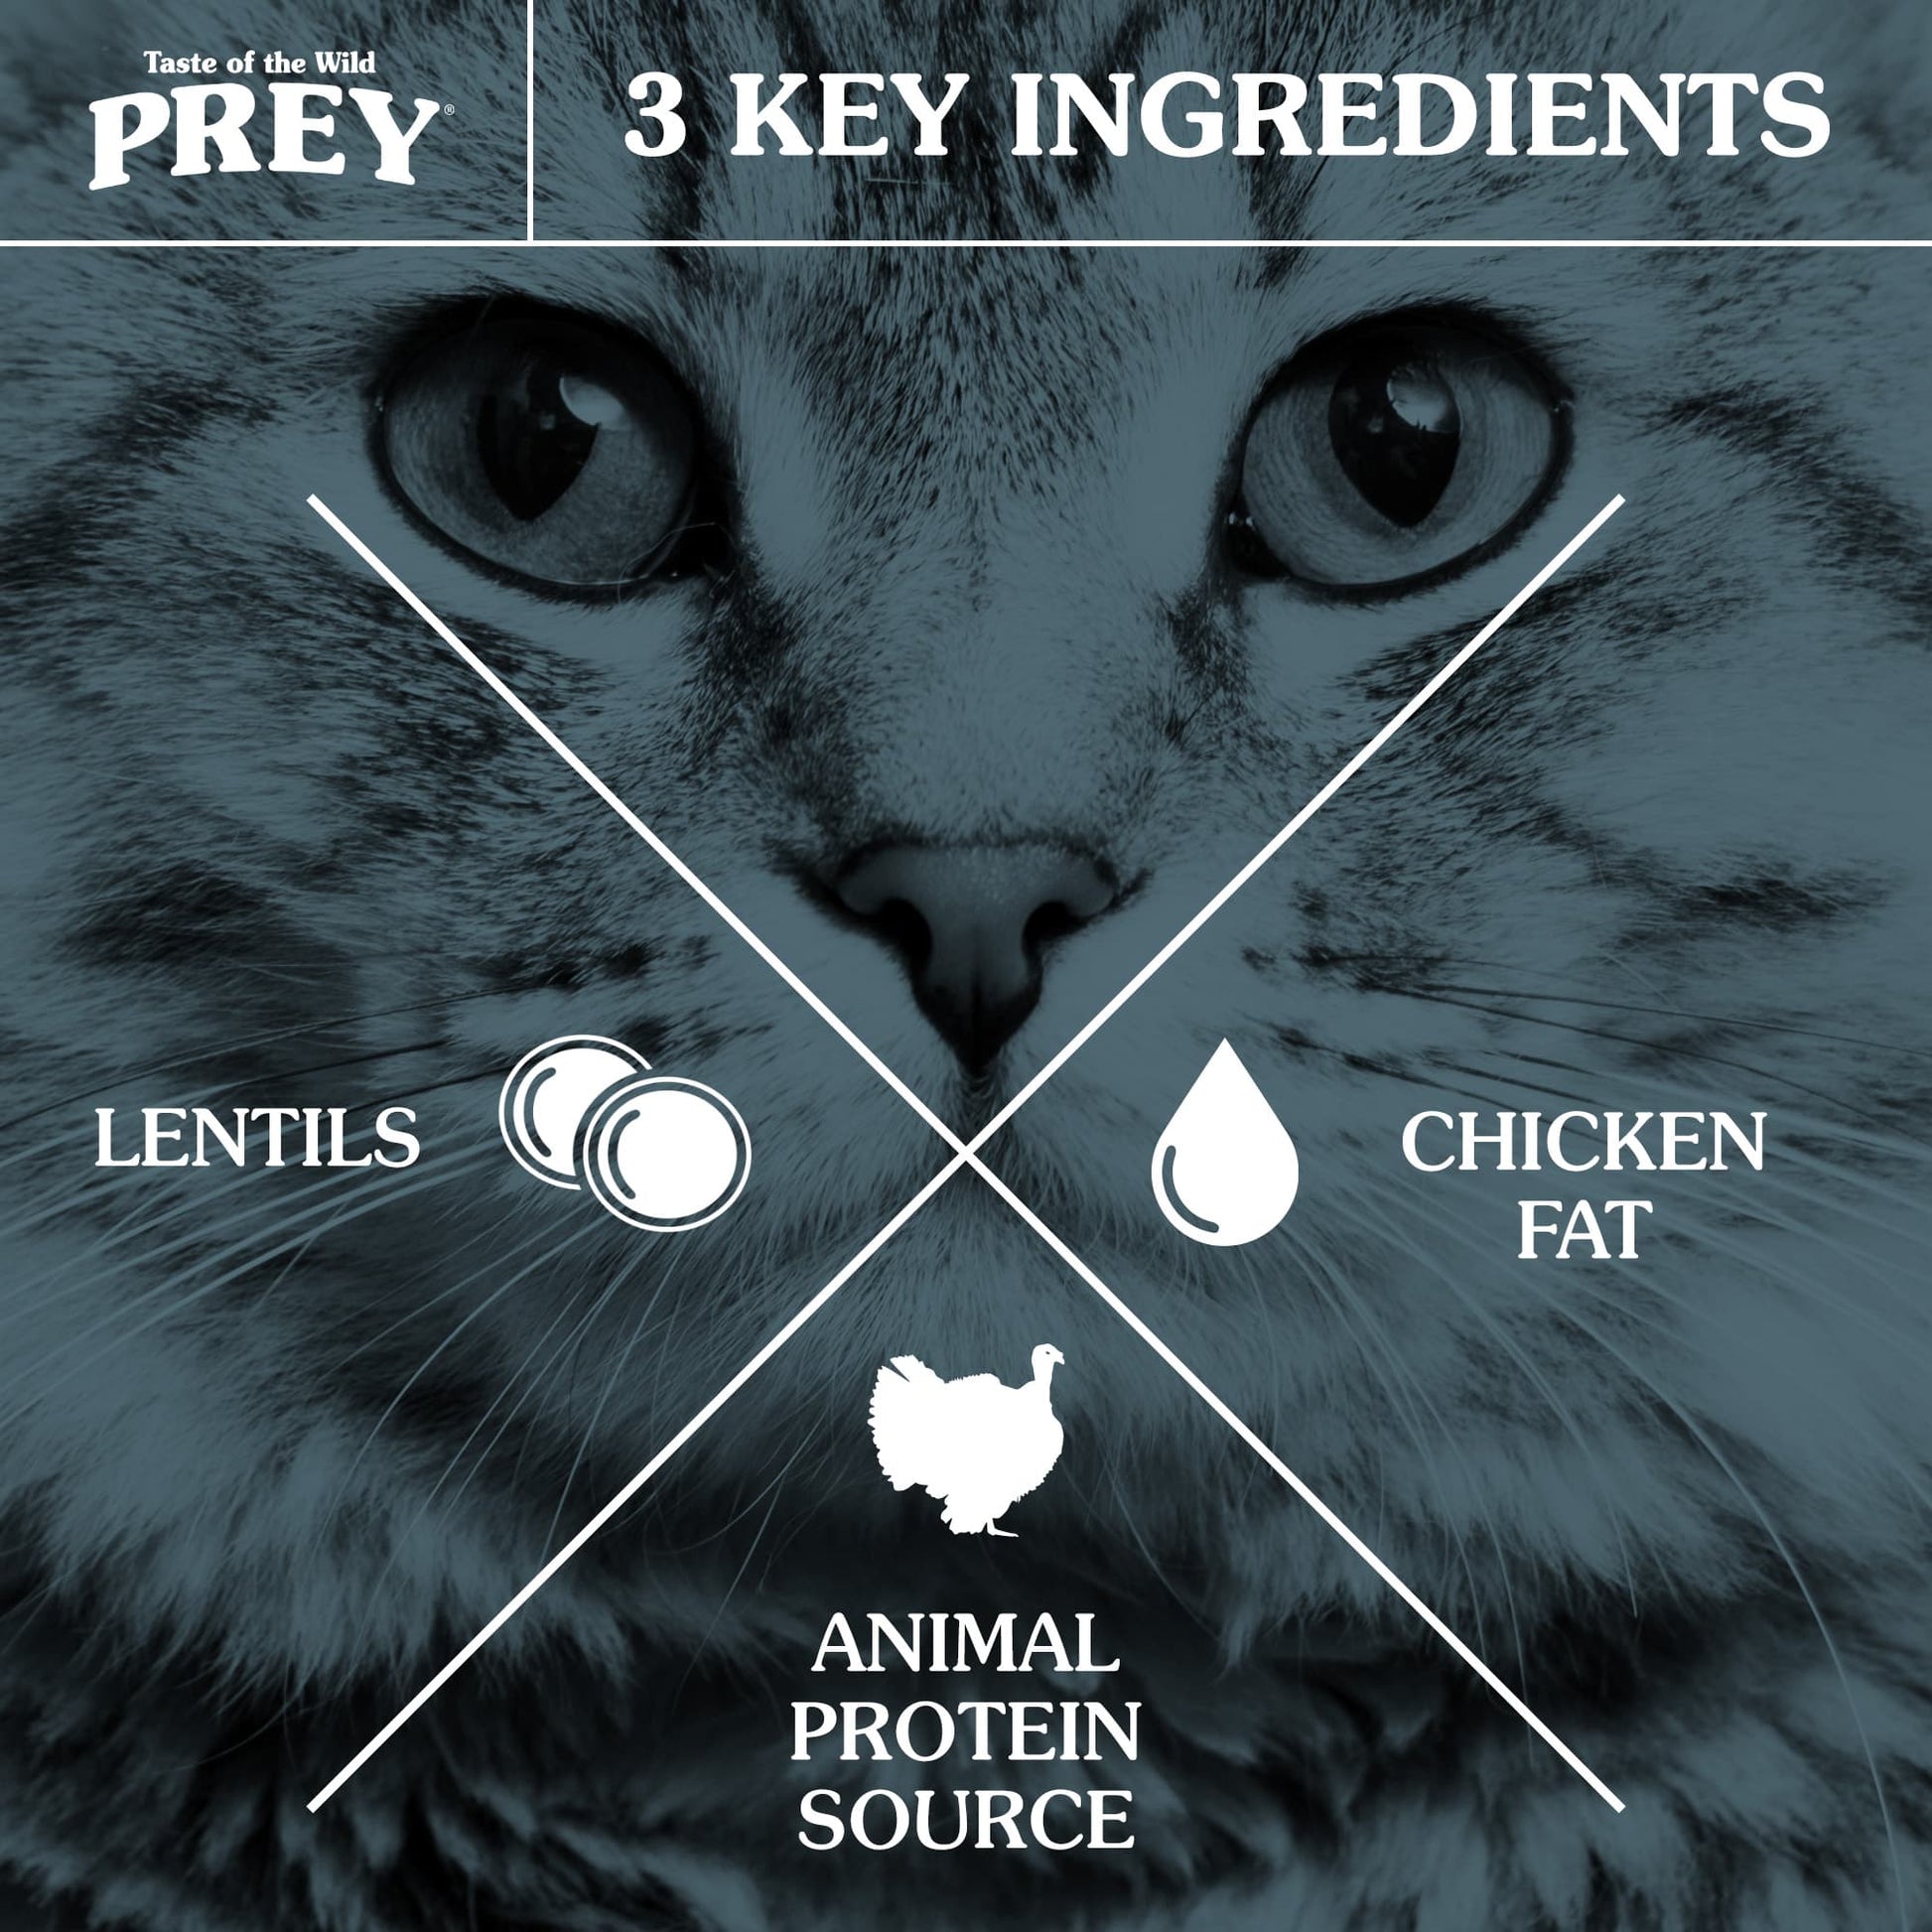 Taste of the Wild PREY Angus Beef Limited Ingredient Recipe for Cats - Pet Merit StoreTaste of the Wild PREY Angus Beef Limited Ingredient Recipe for Cats